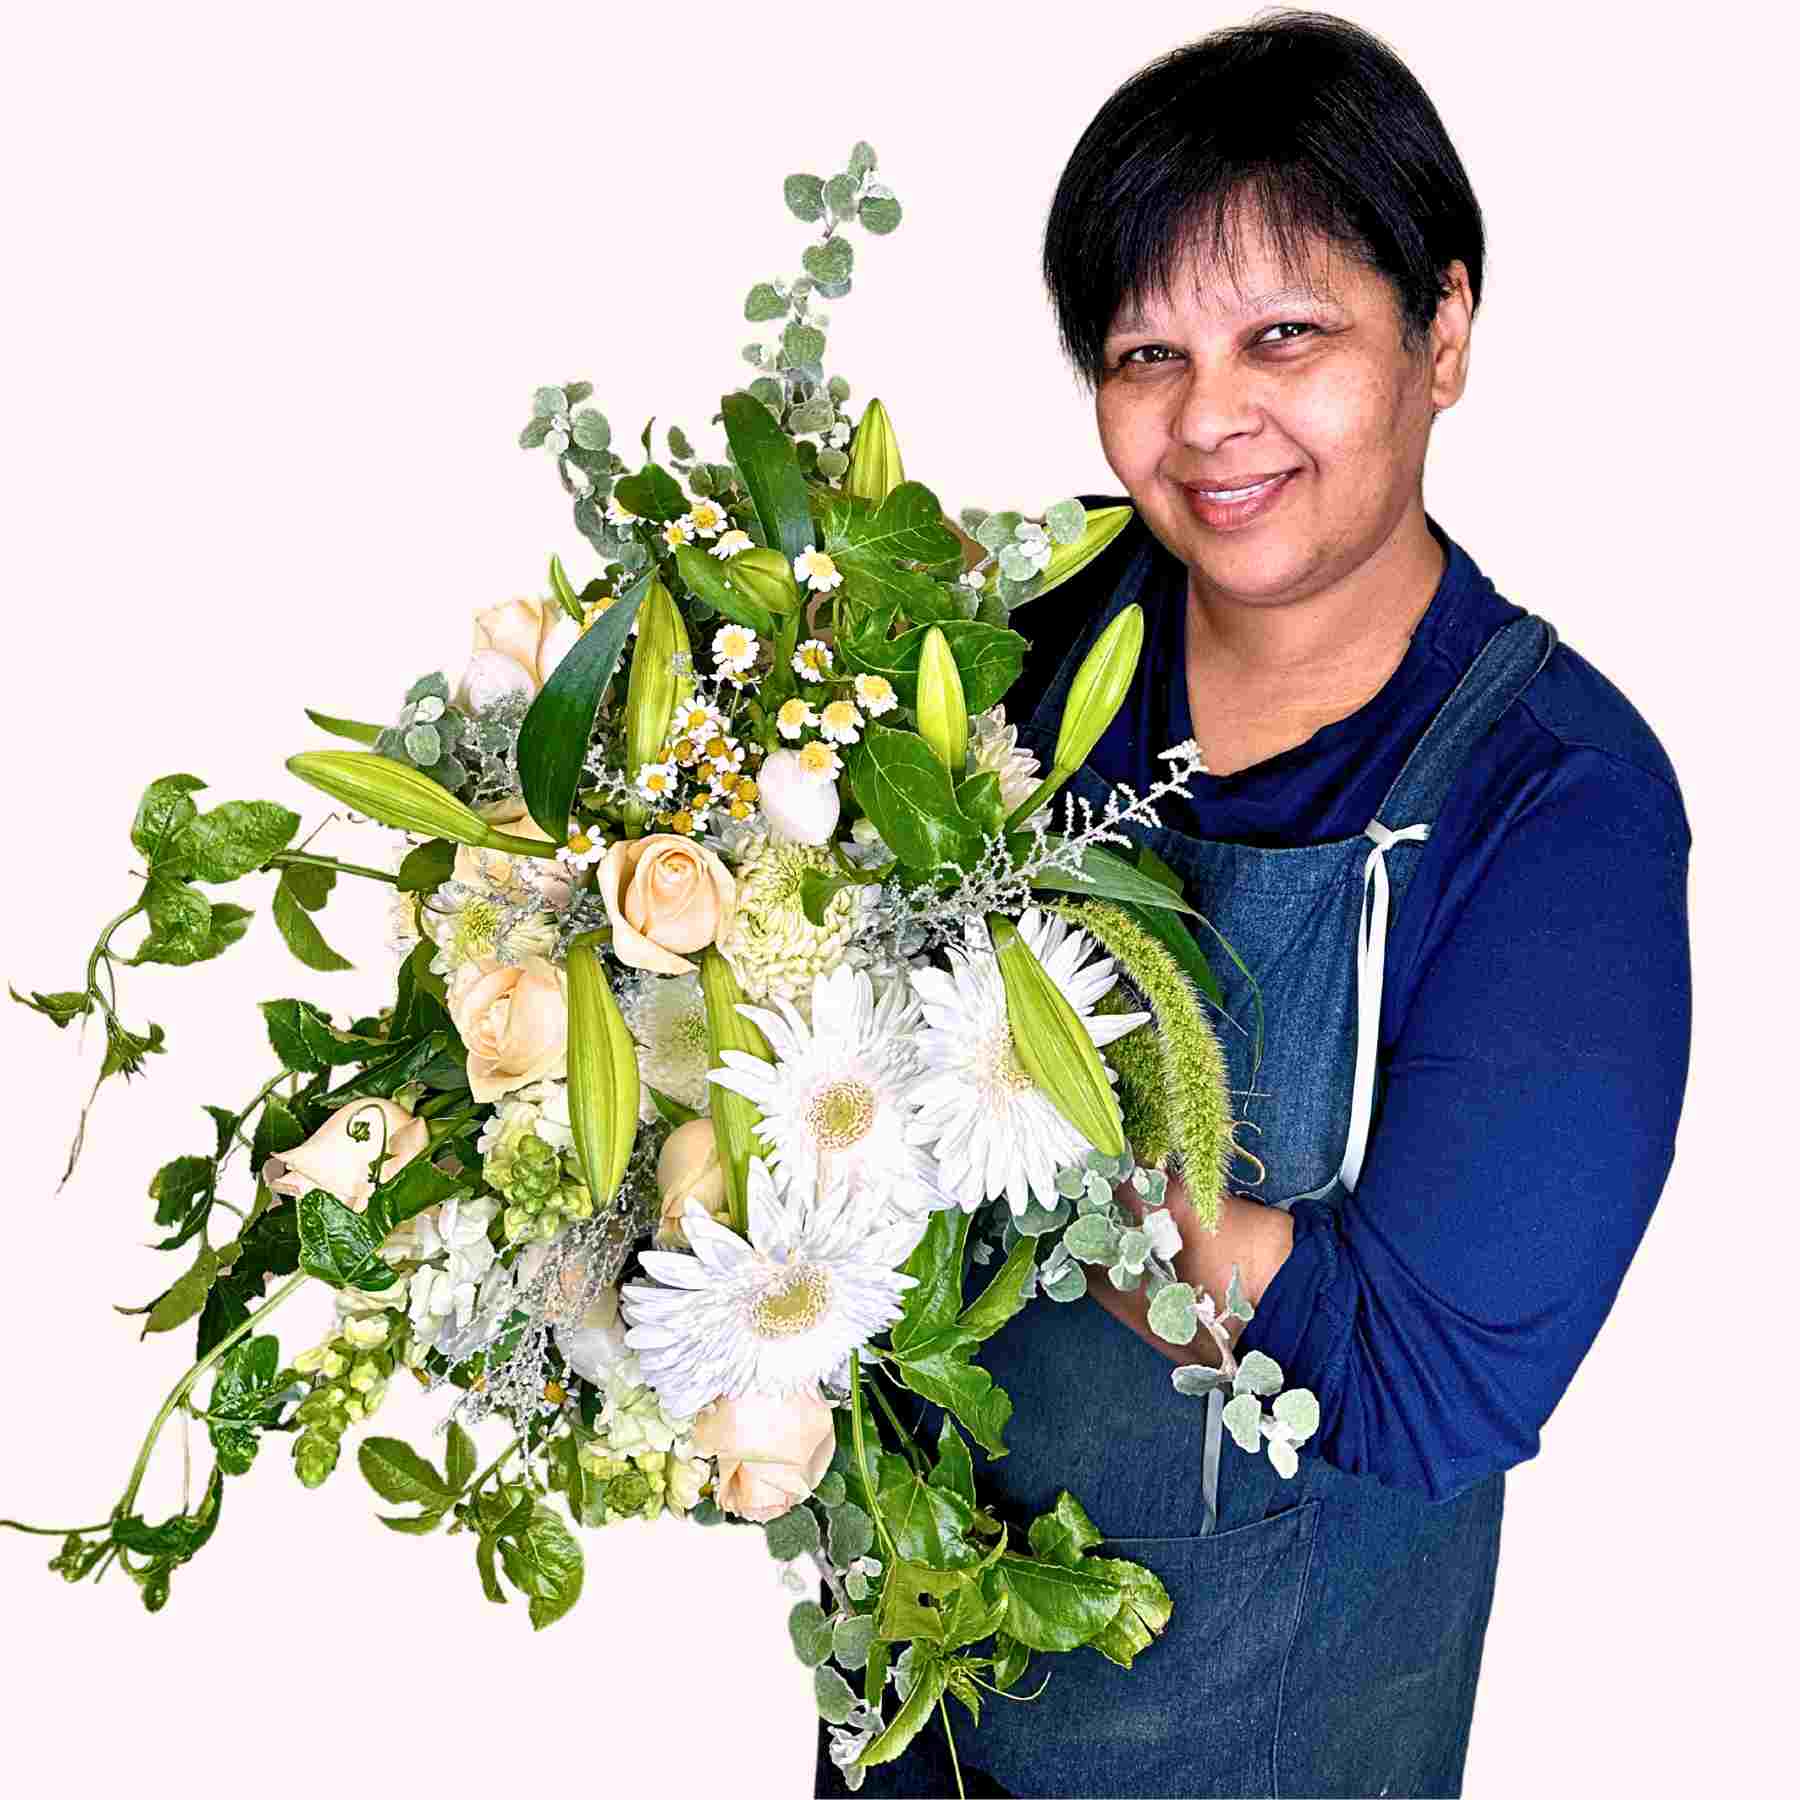 Smiling florist, Tracey, holding a diverse bouquet of roses, gerberas, and lilies named Tracey's Flower Bouquet from Fabulous Flowers and Gifts.